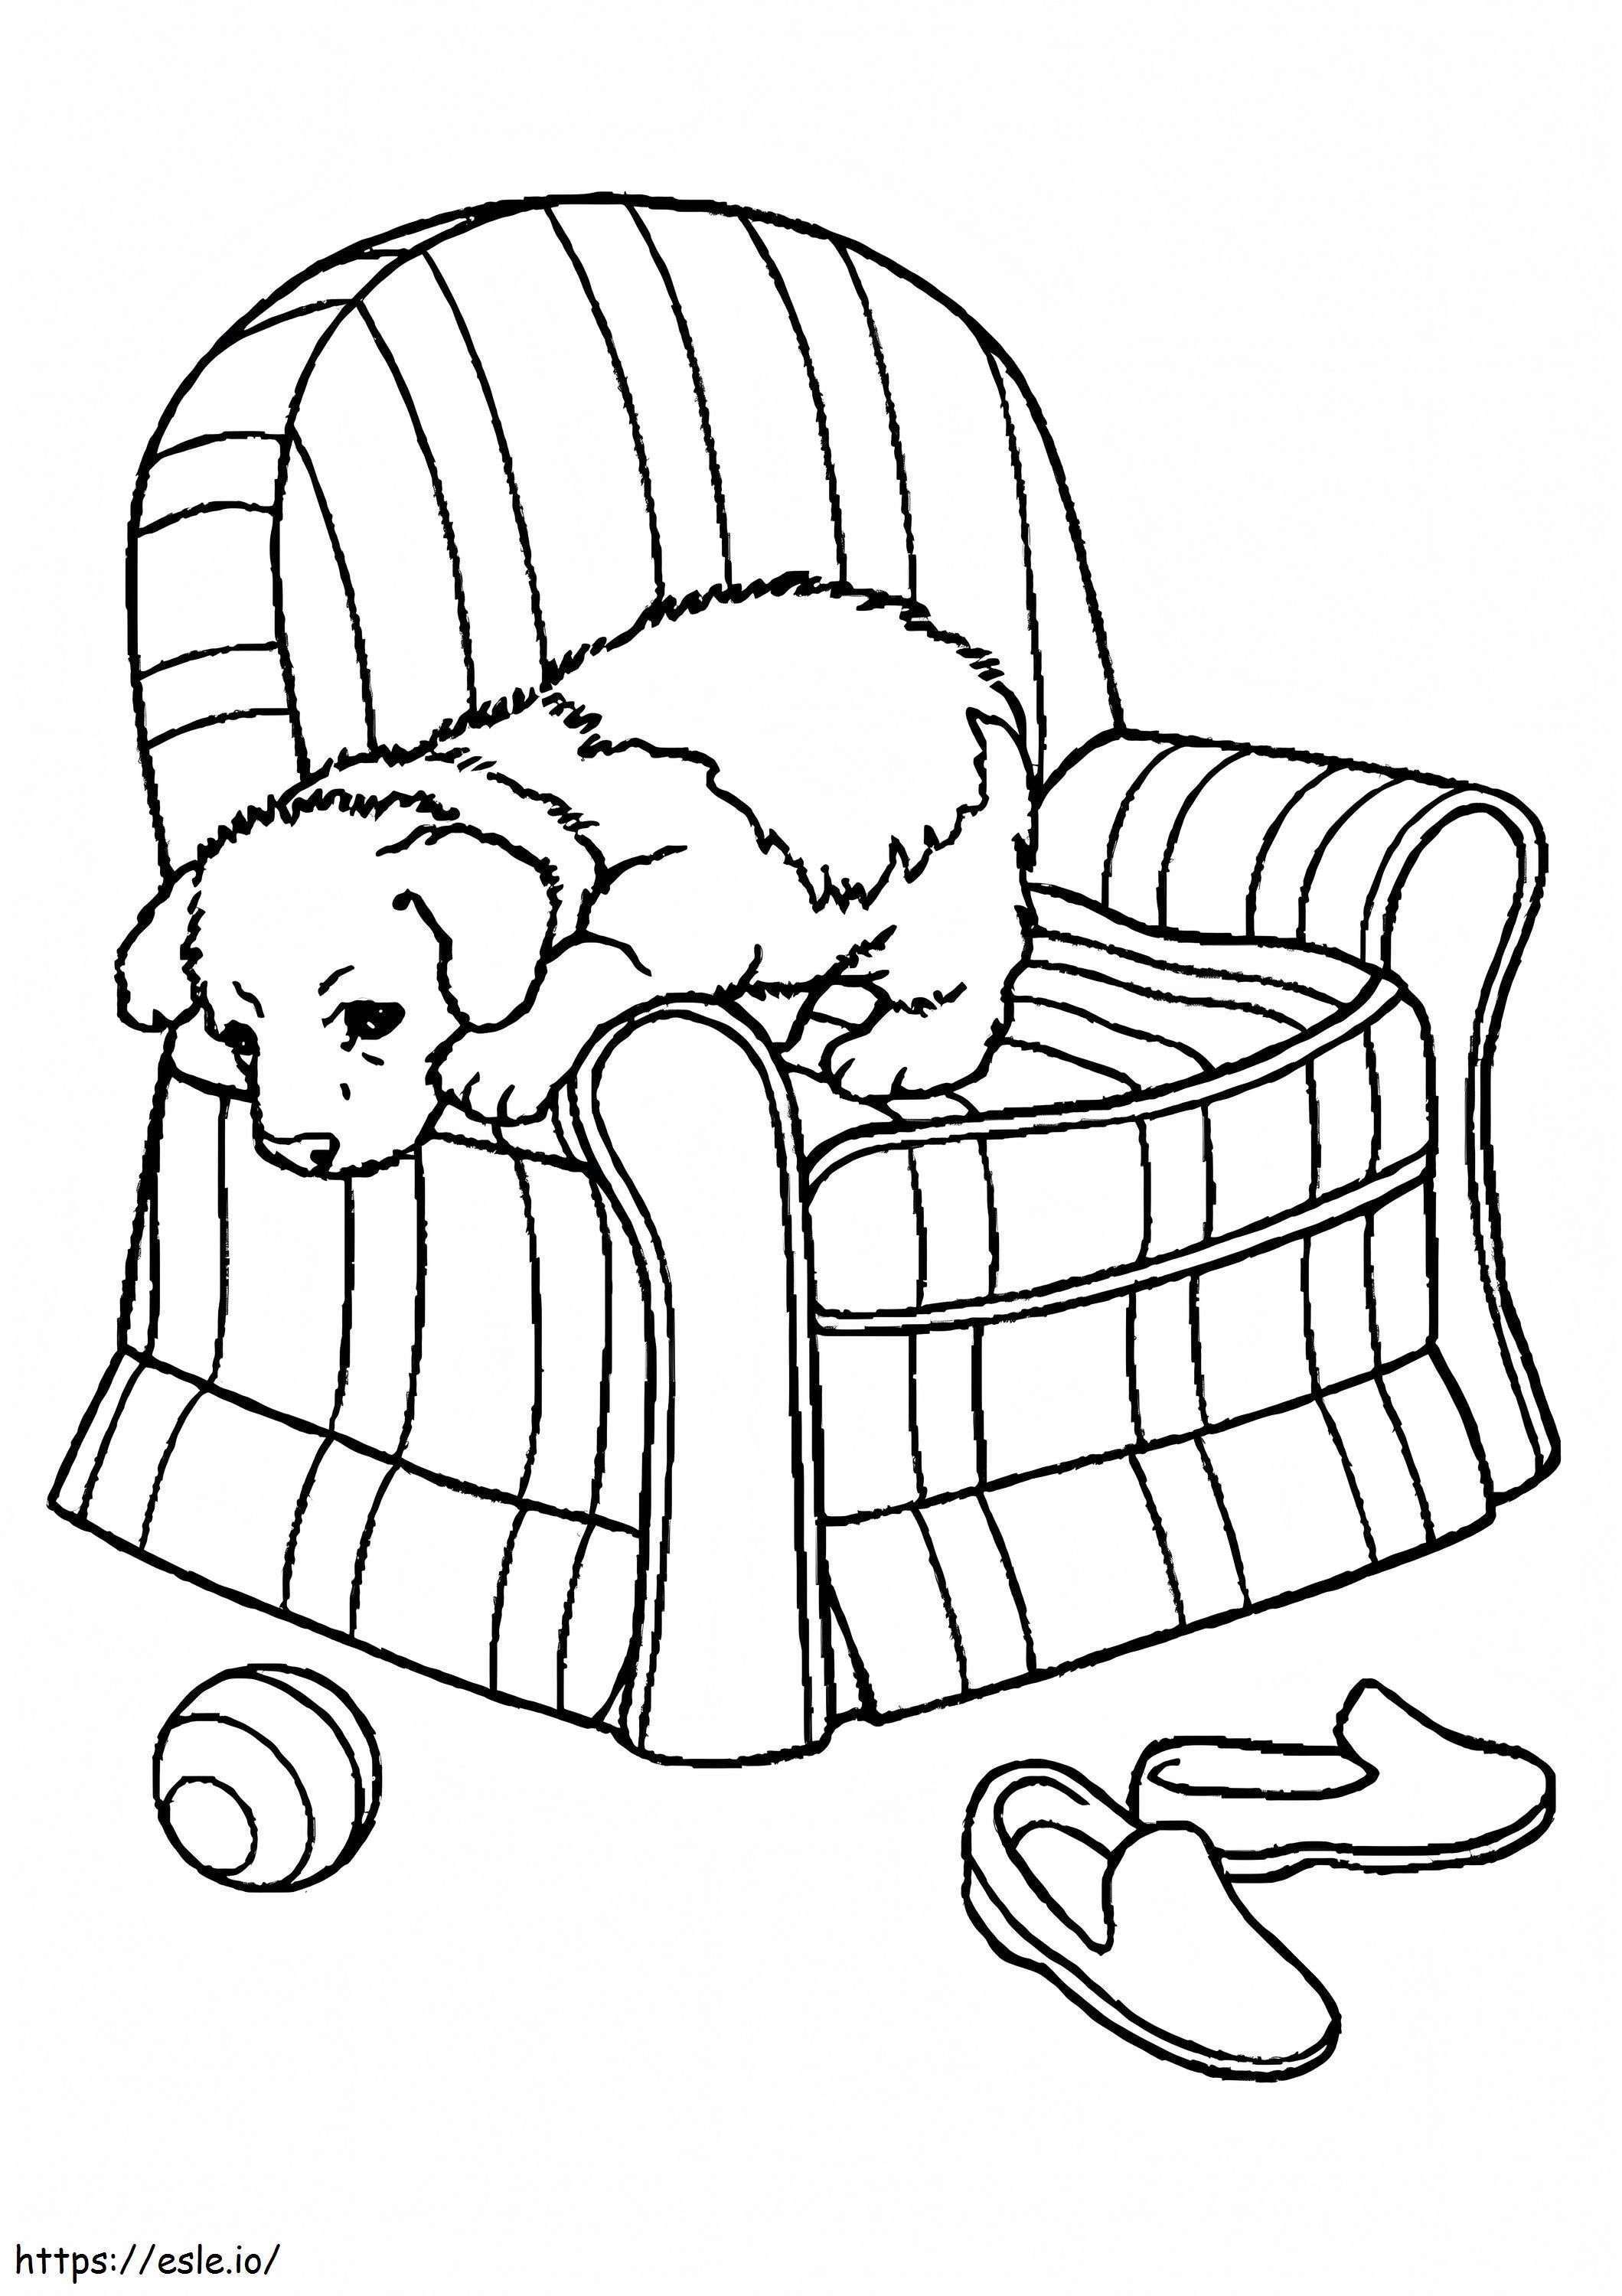 Dog Playing On The Chair coloring page